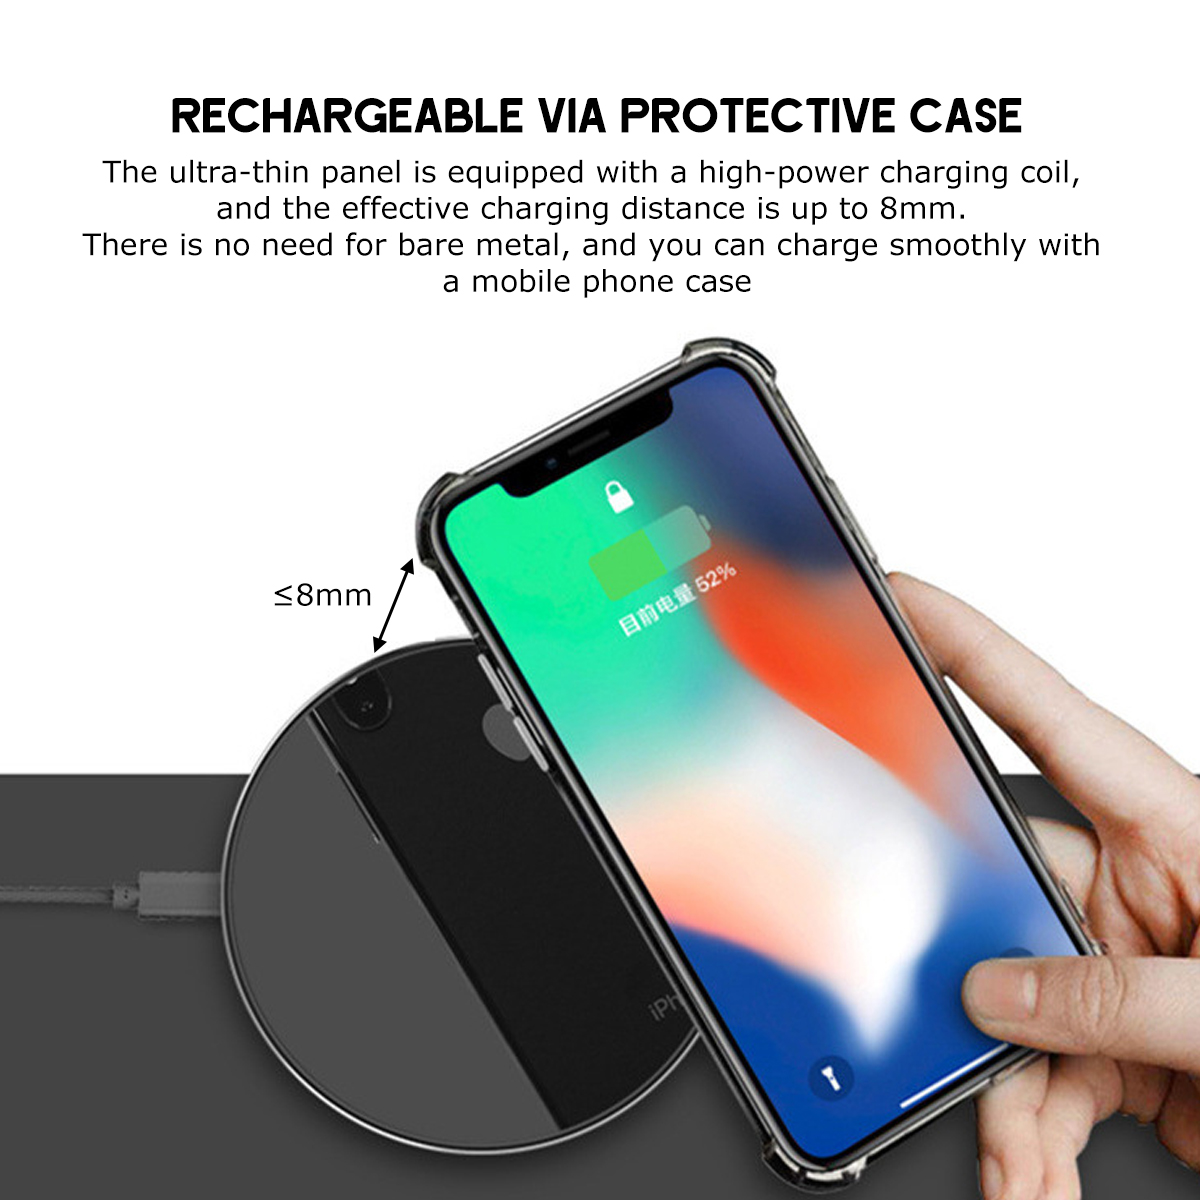 Bakeey-20W-Wireless-Charger-for-iPhone-Xs-Max-X-8-Plus-for-Samsung-Note-9-Note-8-S10-Plus-1614887-6